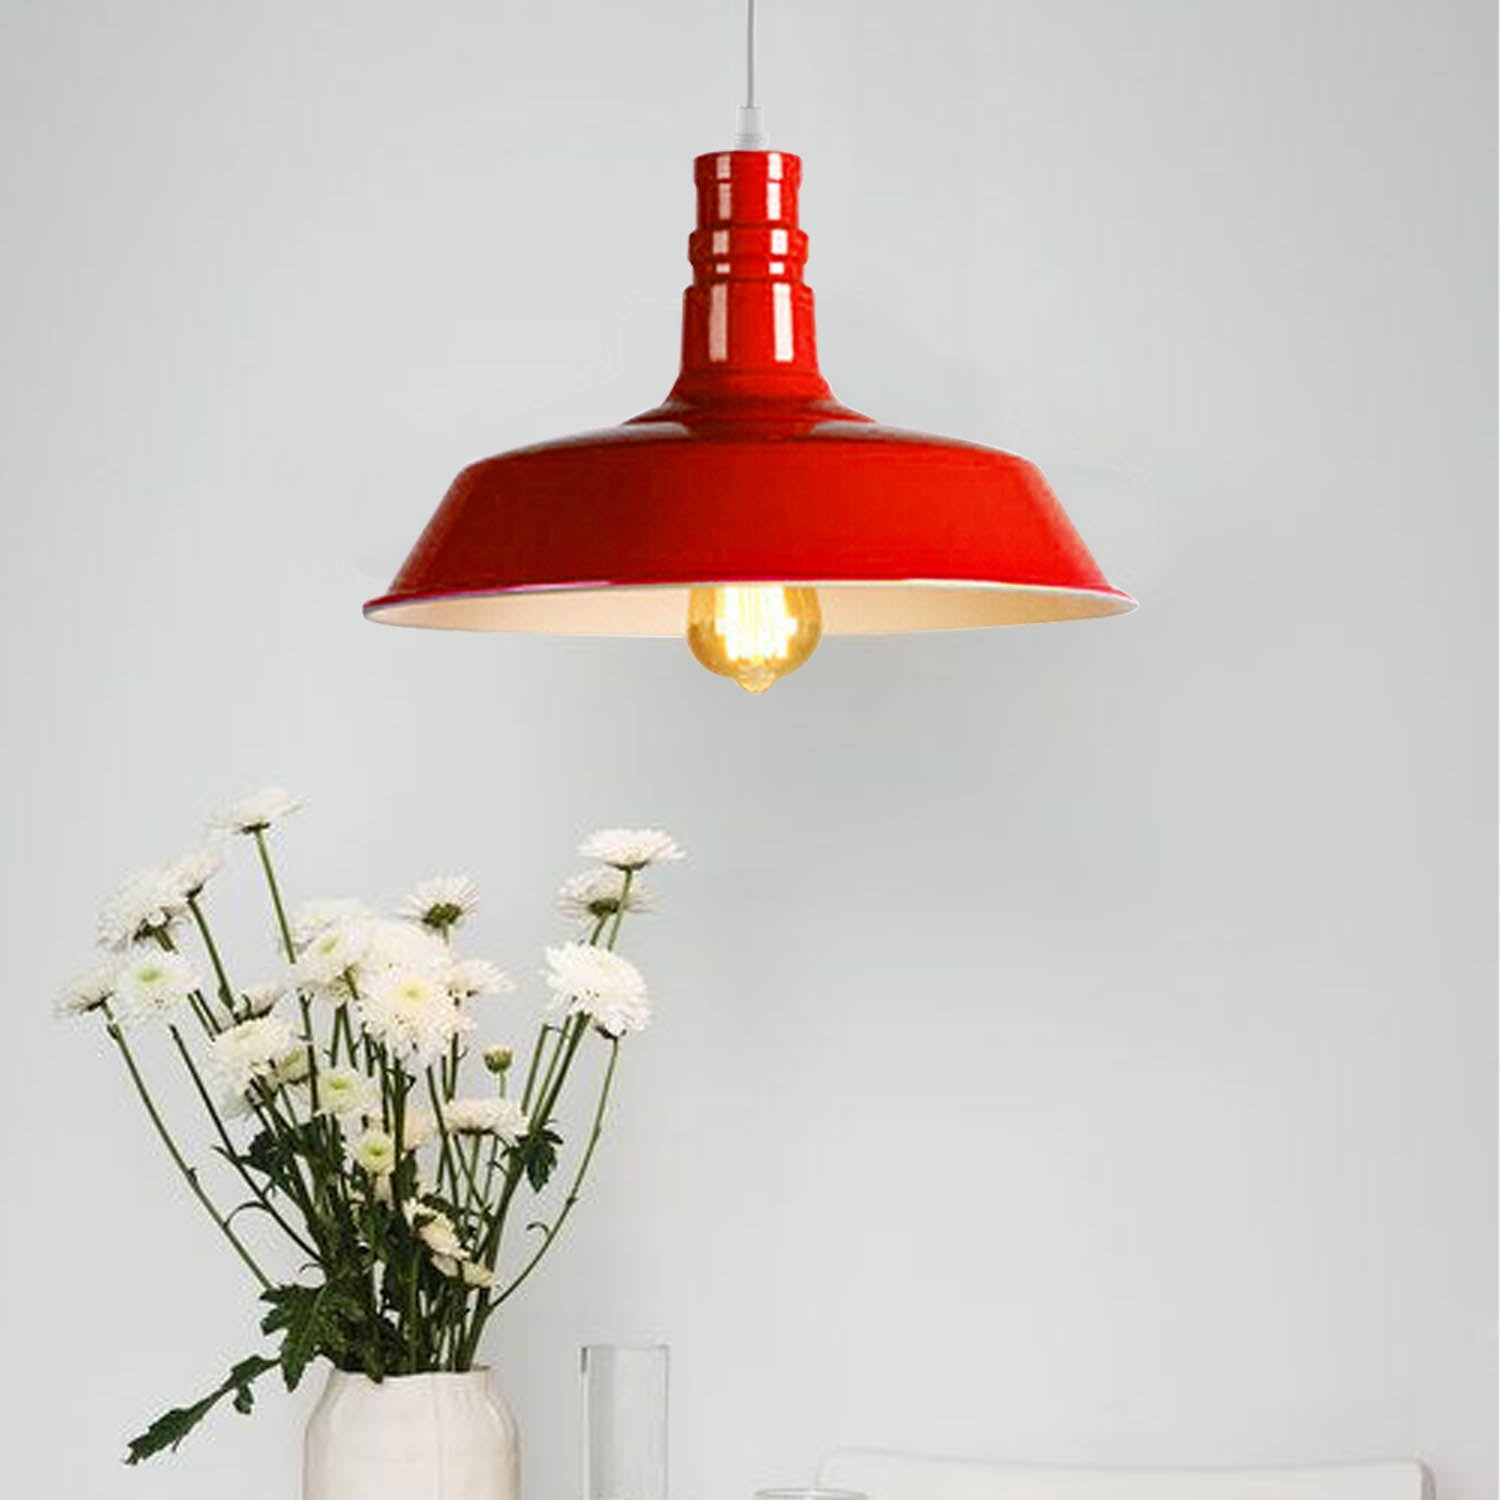 Industrial Vintage Modern Metal Retro E27 Ceiling Red Barn Pendant Shade - Application Image 1